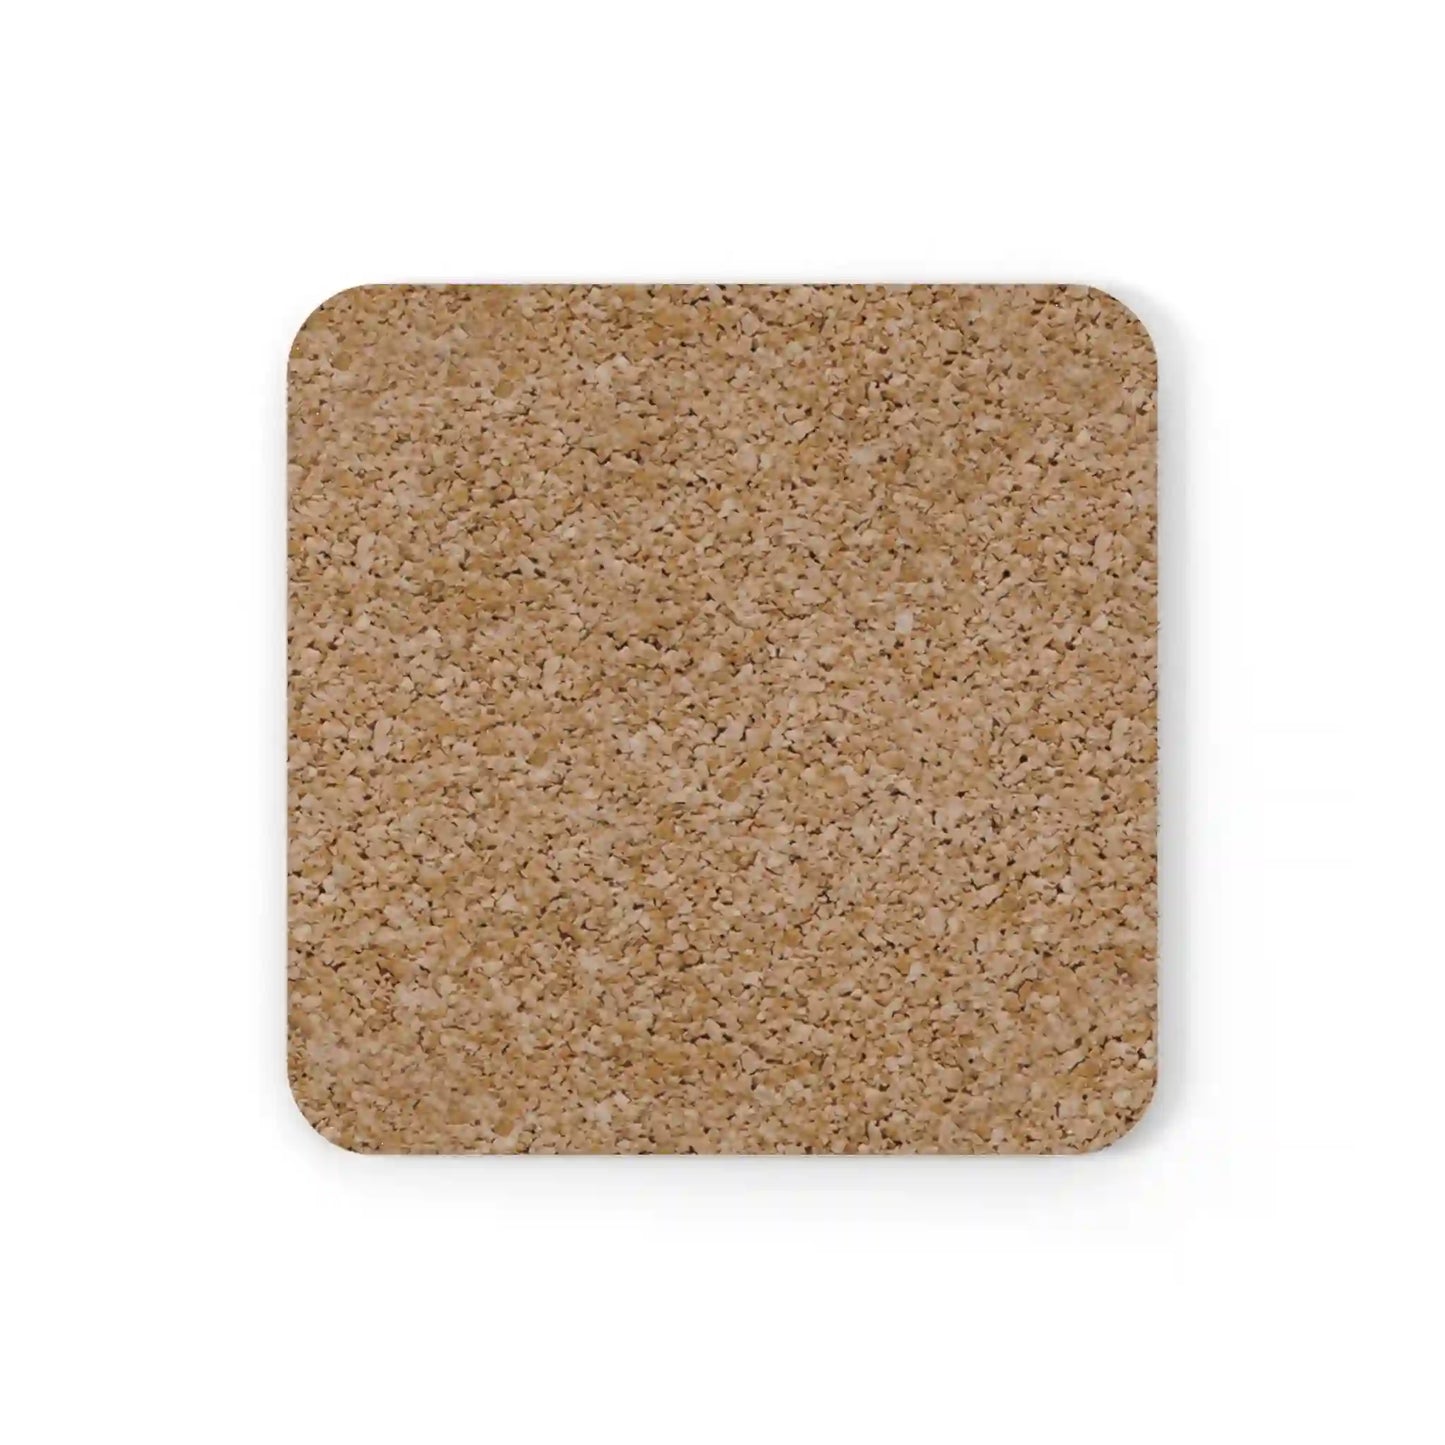 Non-slip premium cork coaster, furniture protection, mama gift, Mother's Day, gifts for mom, flower design for mom